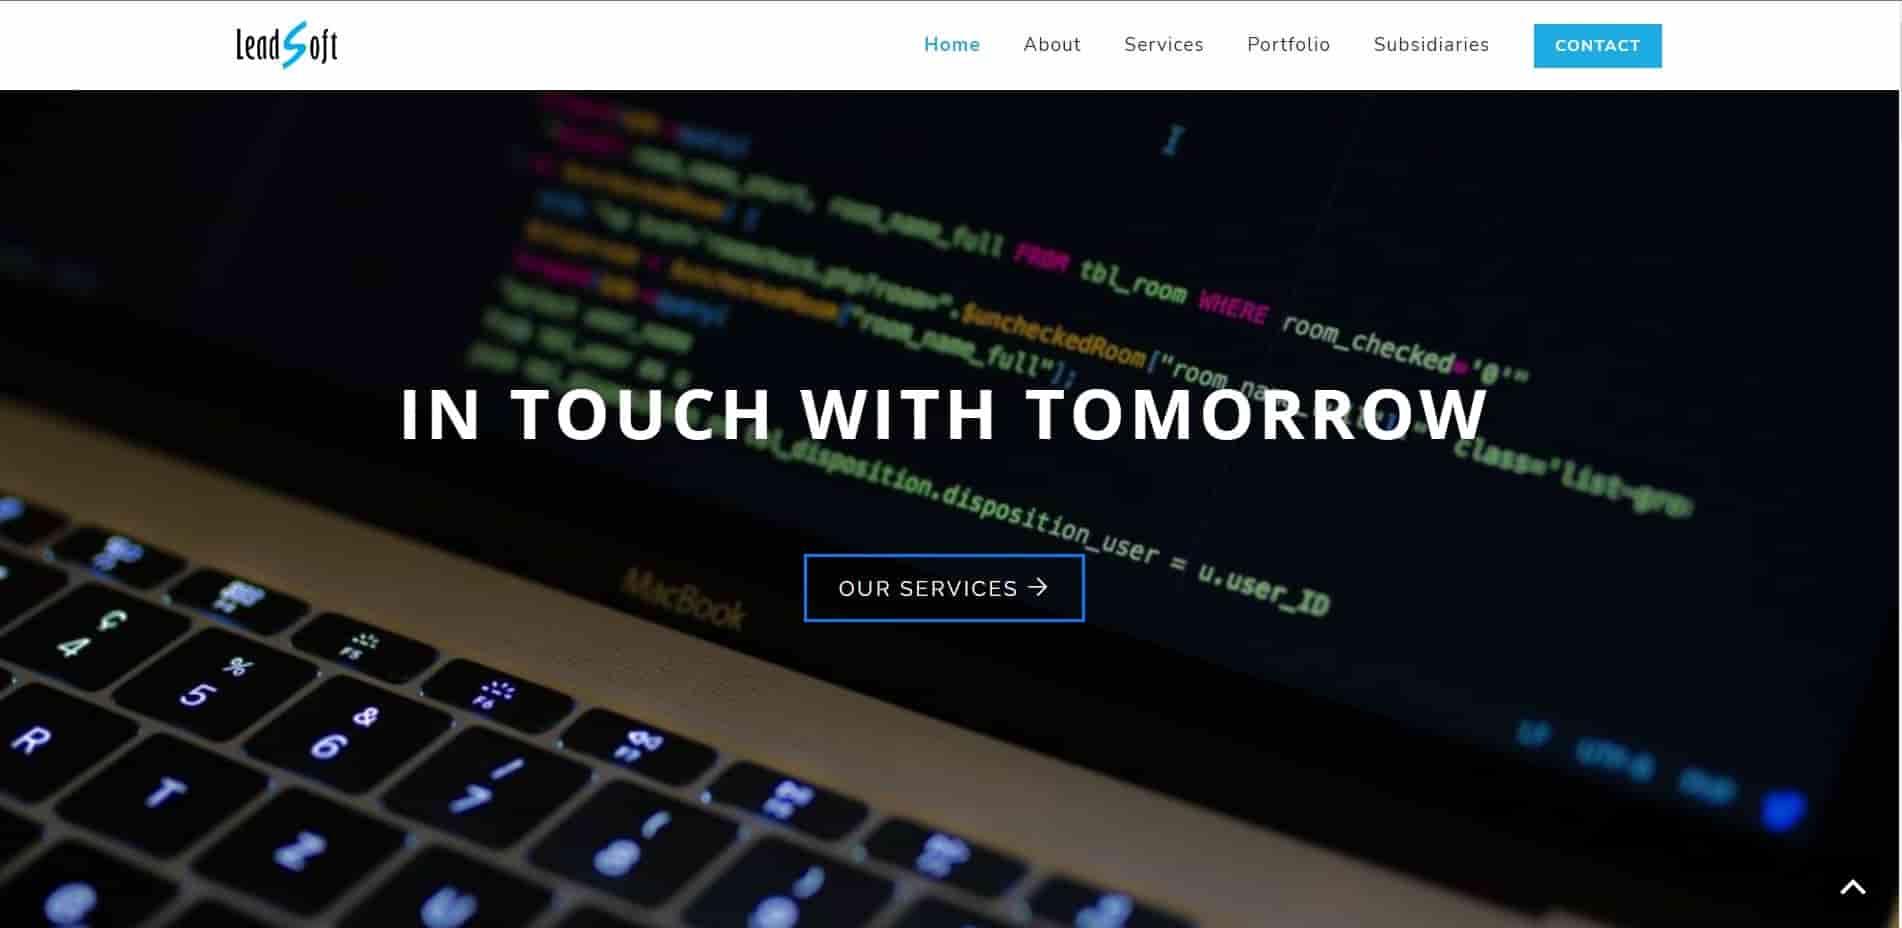 A software company from Bangladesh that is 'LeadSoft' where there homepage is displayed and it says In Touch With Tomorrow.